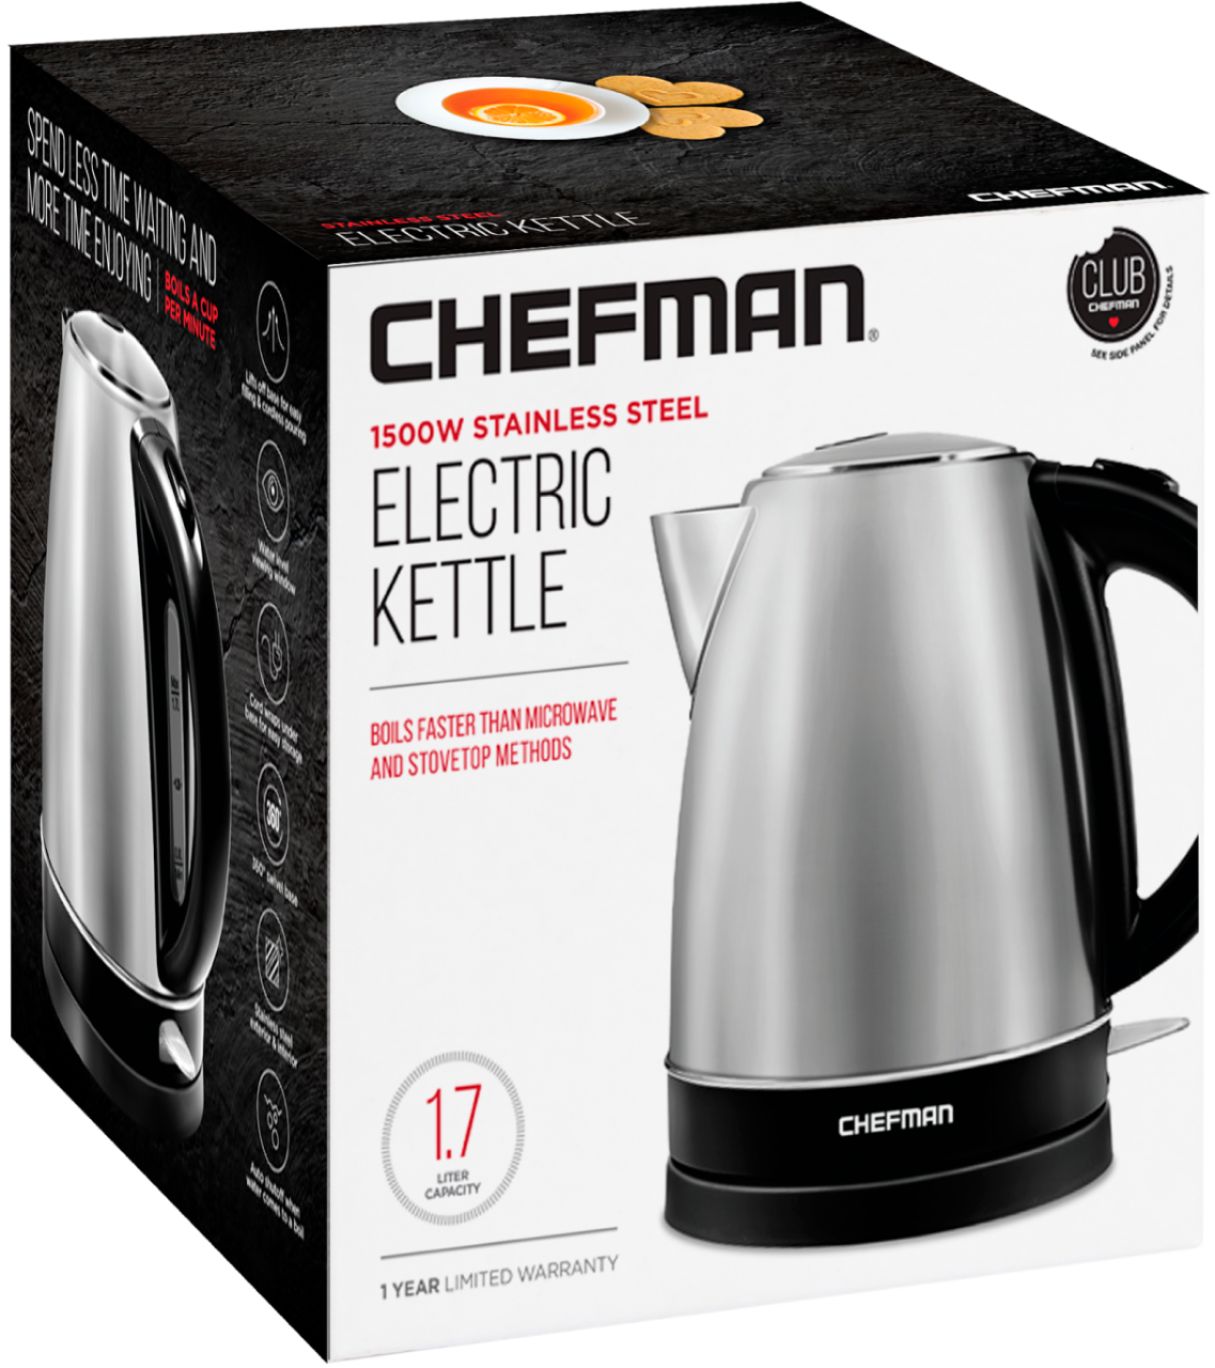 $6 Discount on Chefman Electric Kettle. Currently priced at $23.99